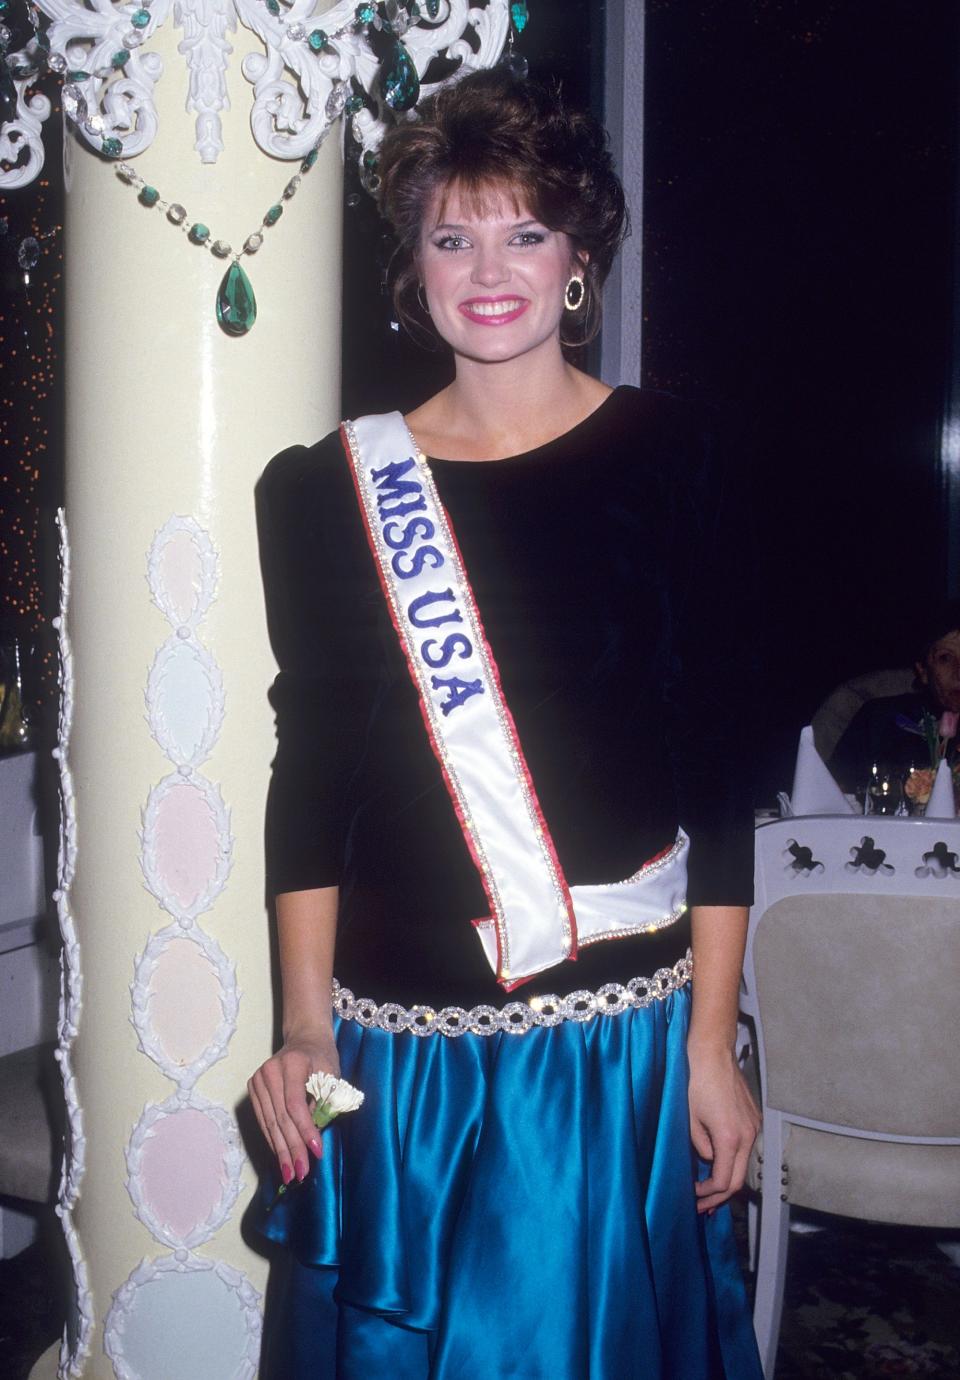 Miss USA 1987 Michelle Royer smiles wearing her sash.